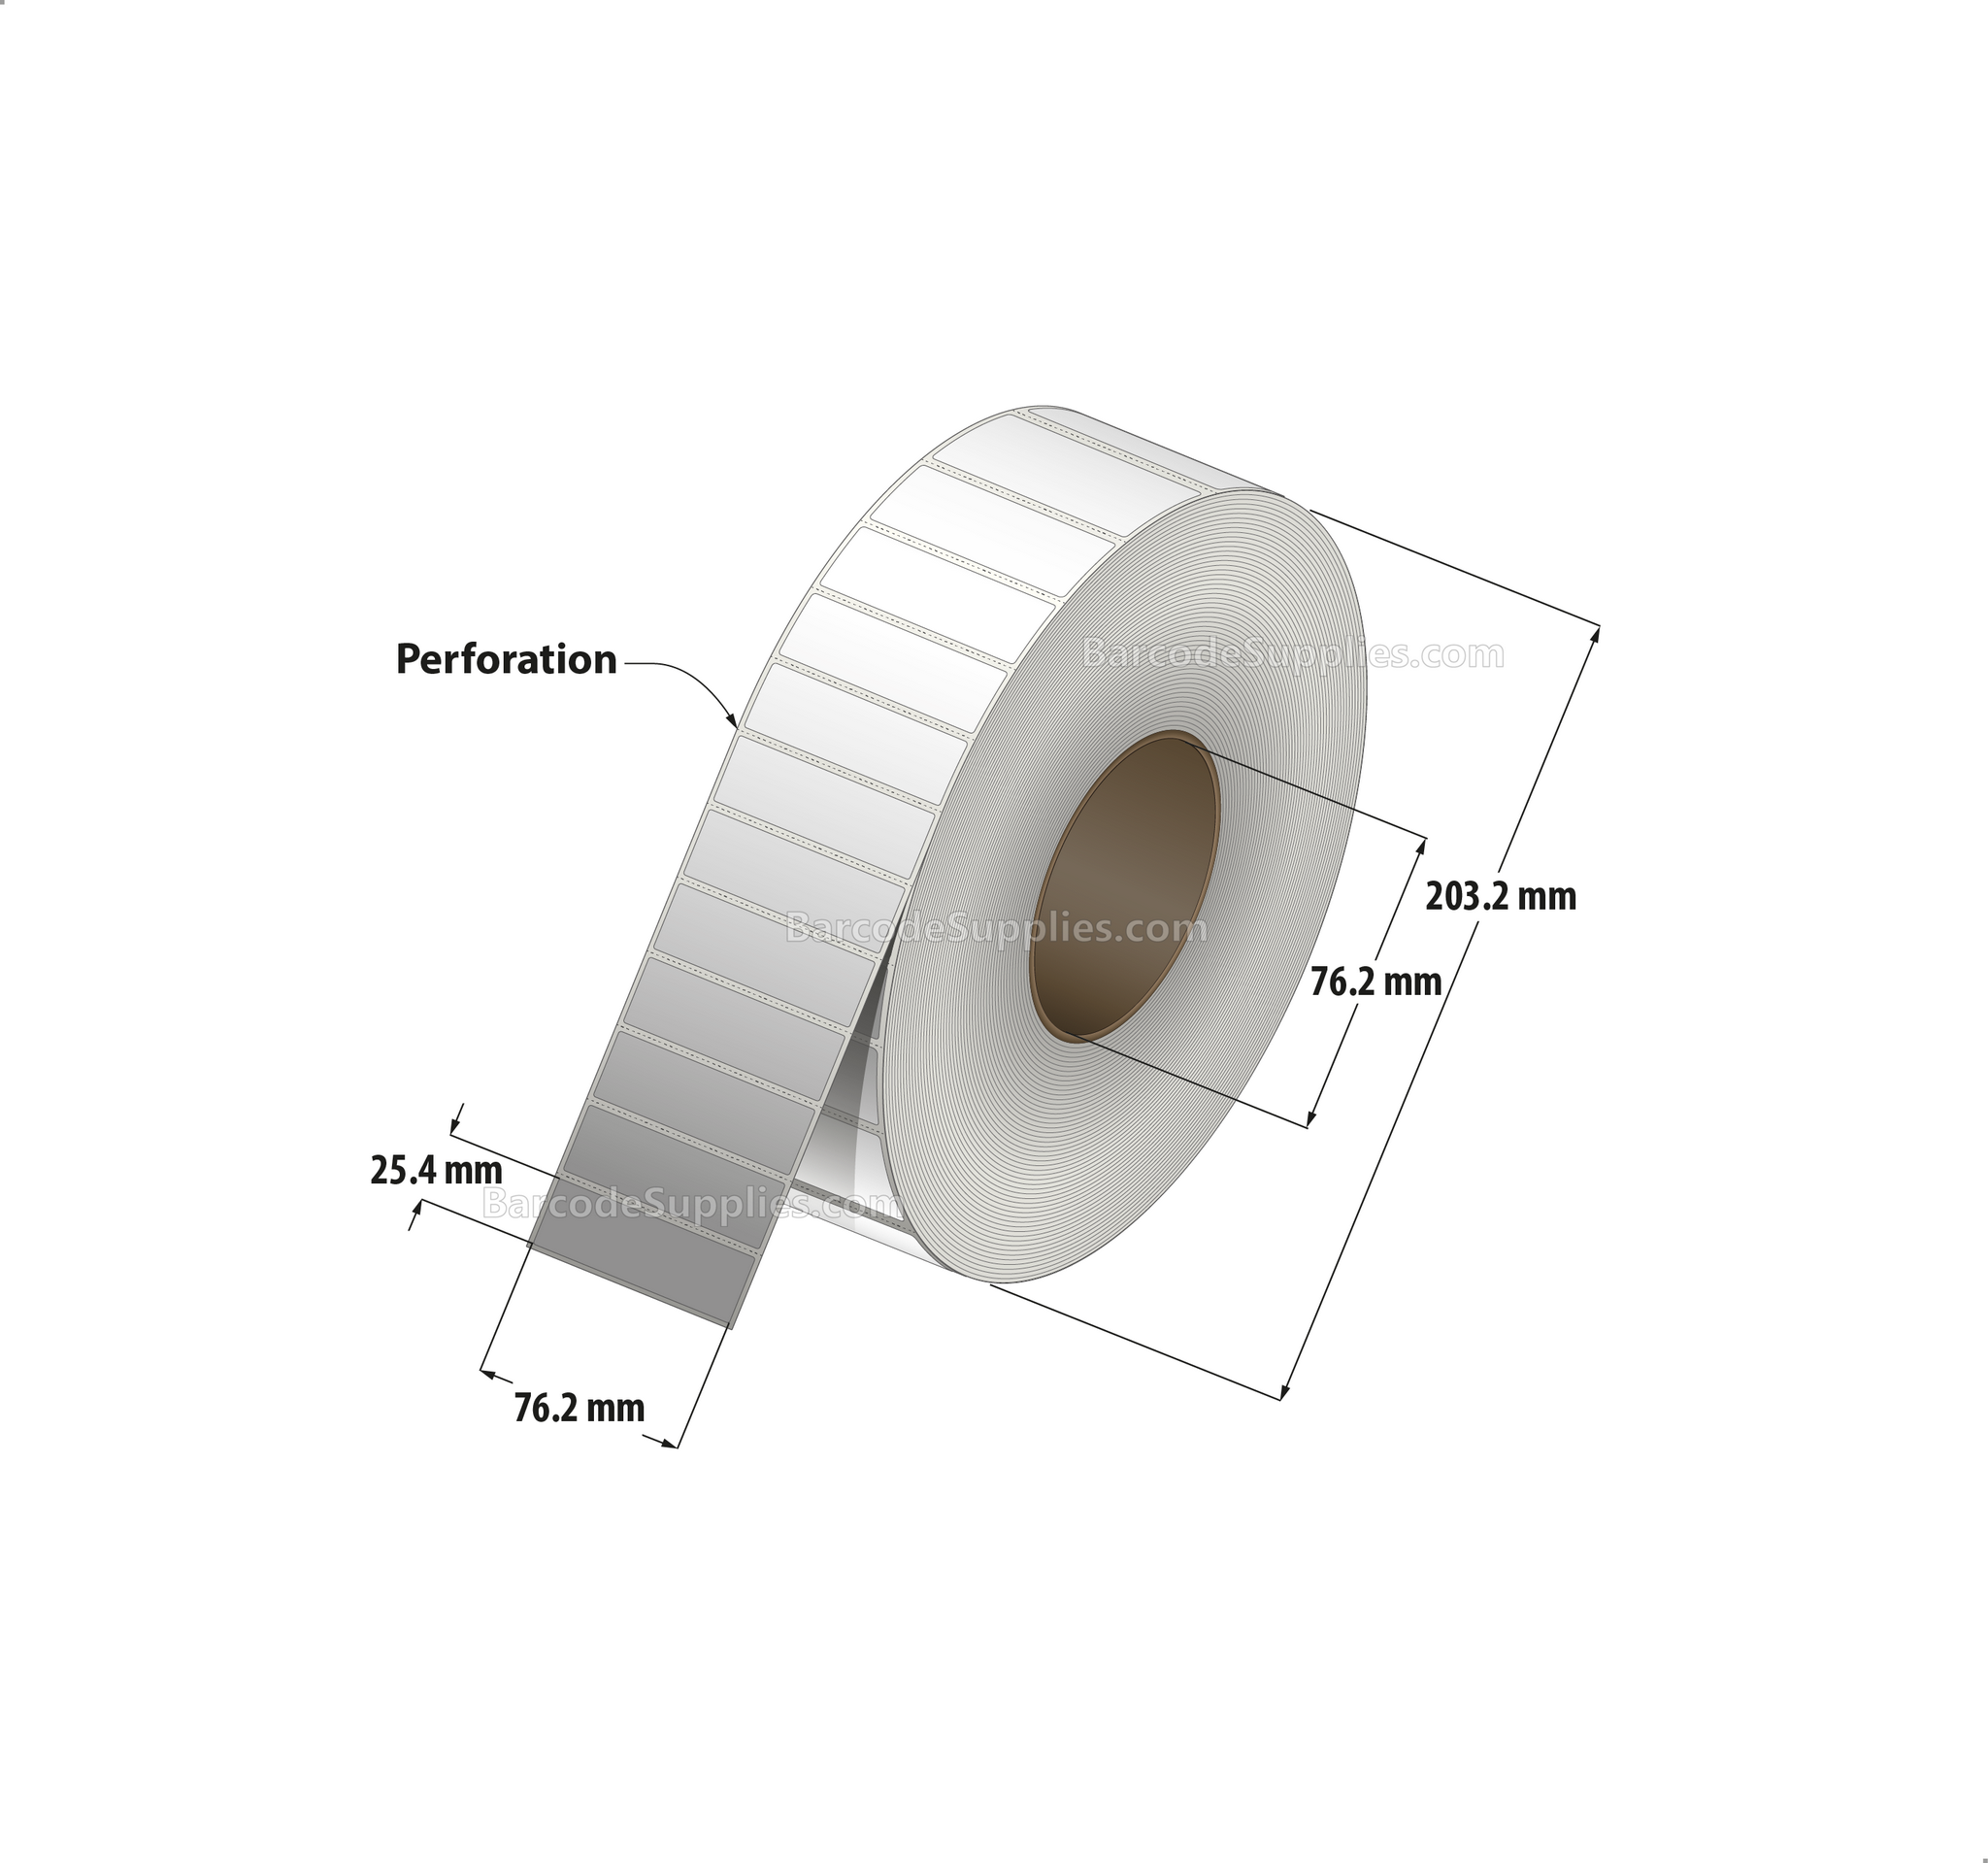 3 x 1 Thermal Transfer White Labels With Rubber Adhesive - Perforated - 5000 Labels Per Roll - Carton Of 6 Rolls - 30000 Labels Total - MPN: CTT300100-3P